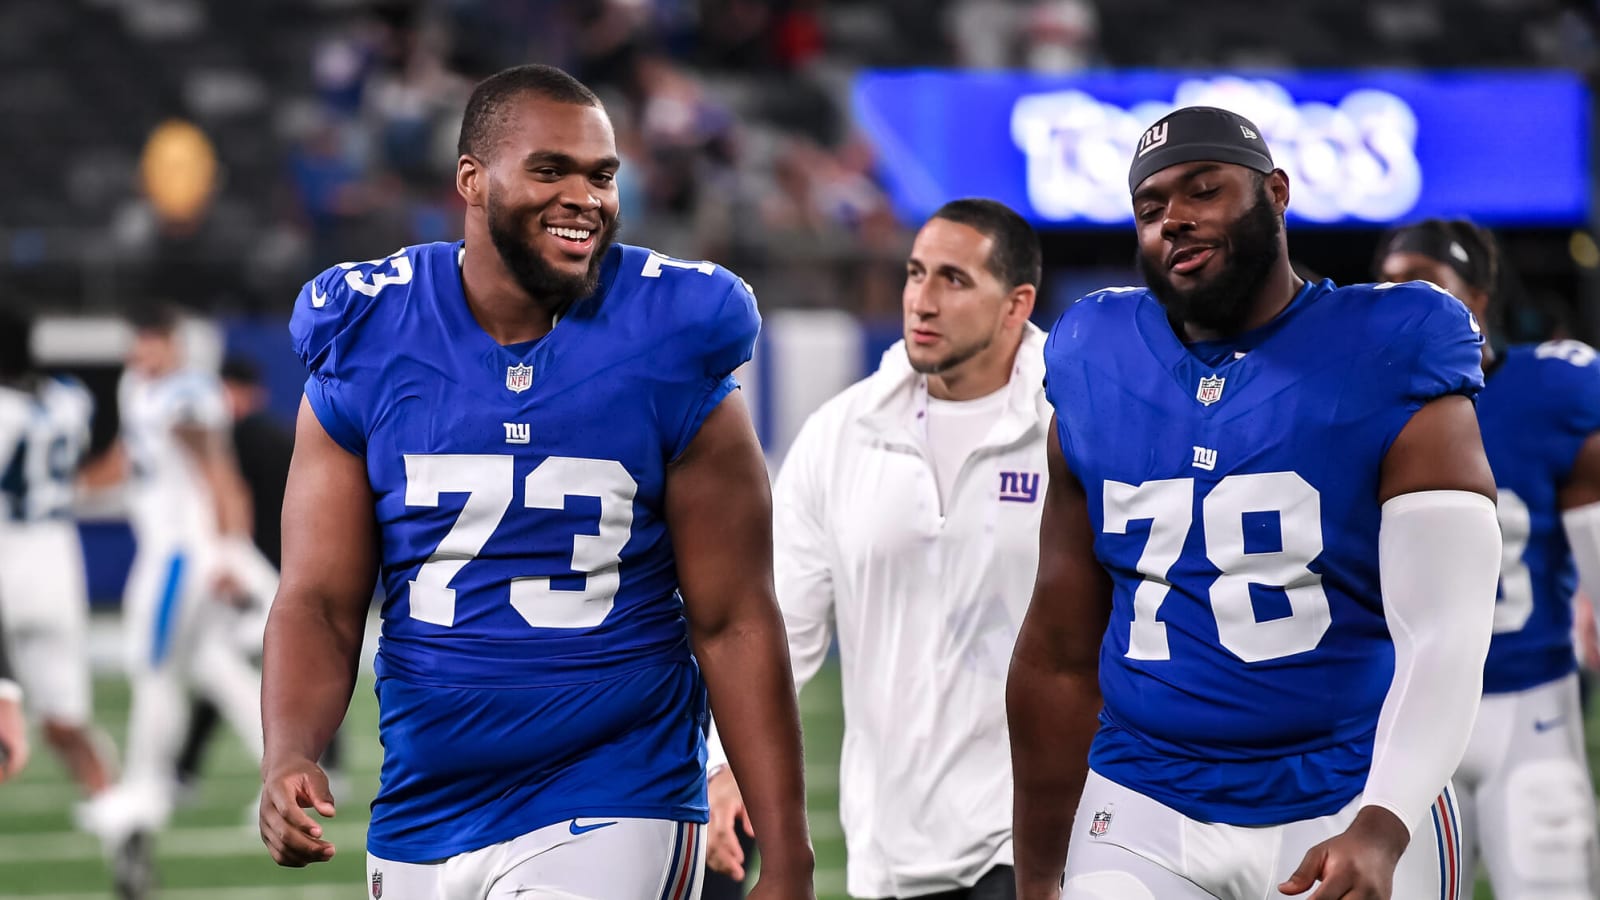 Giants’ offensive line disrespected again, but for good reason